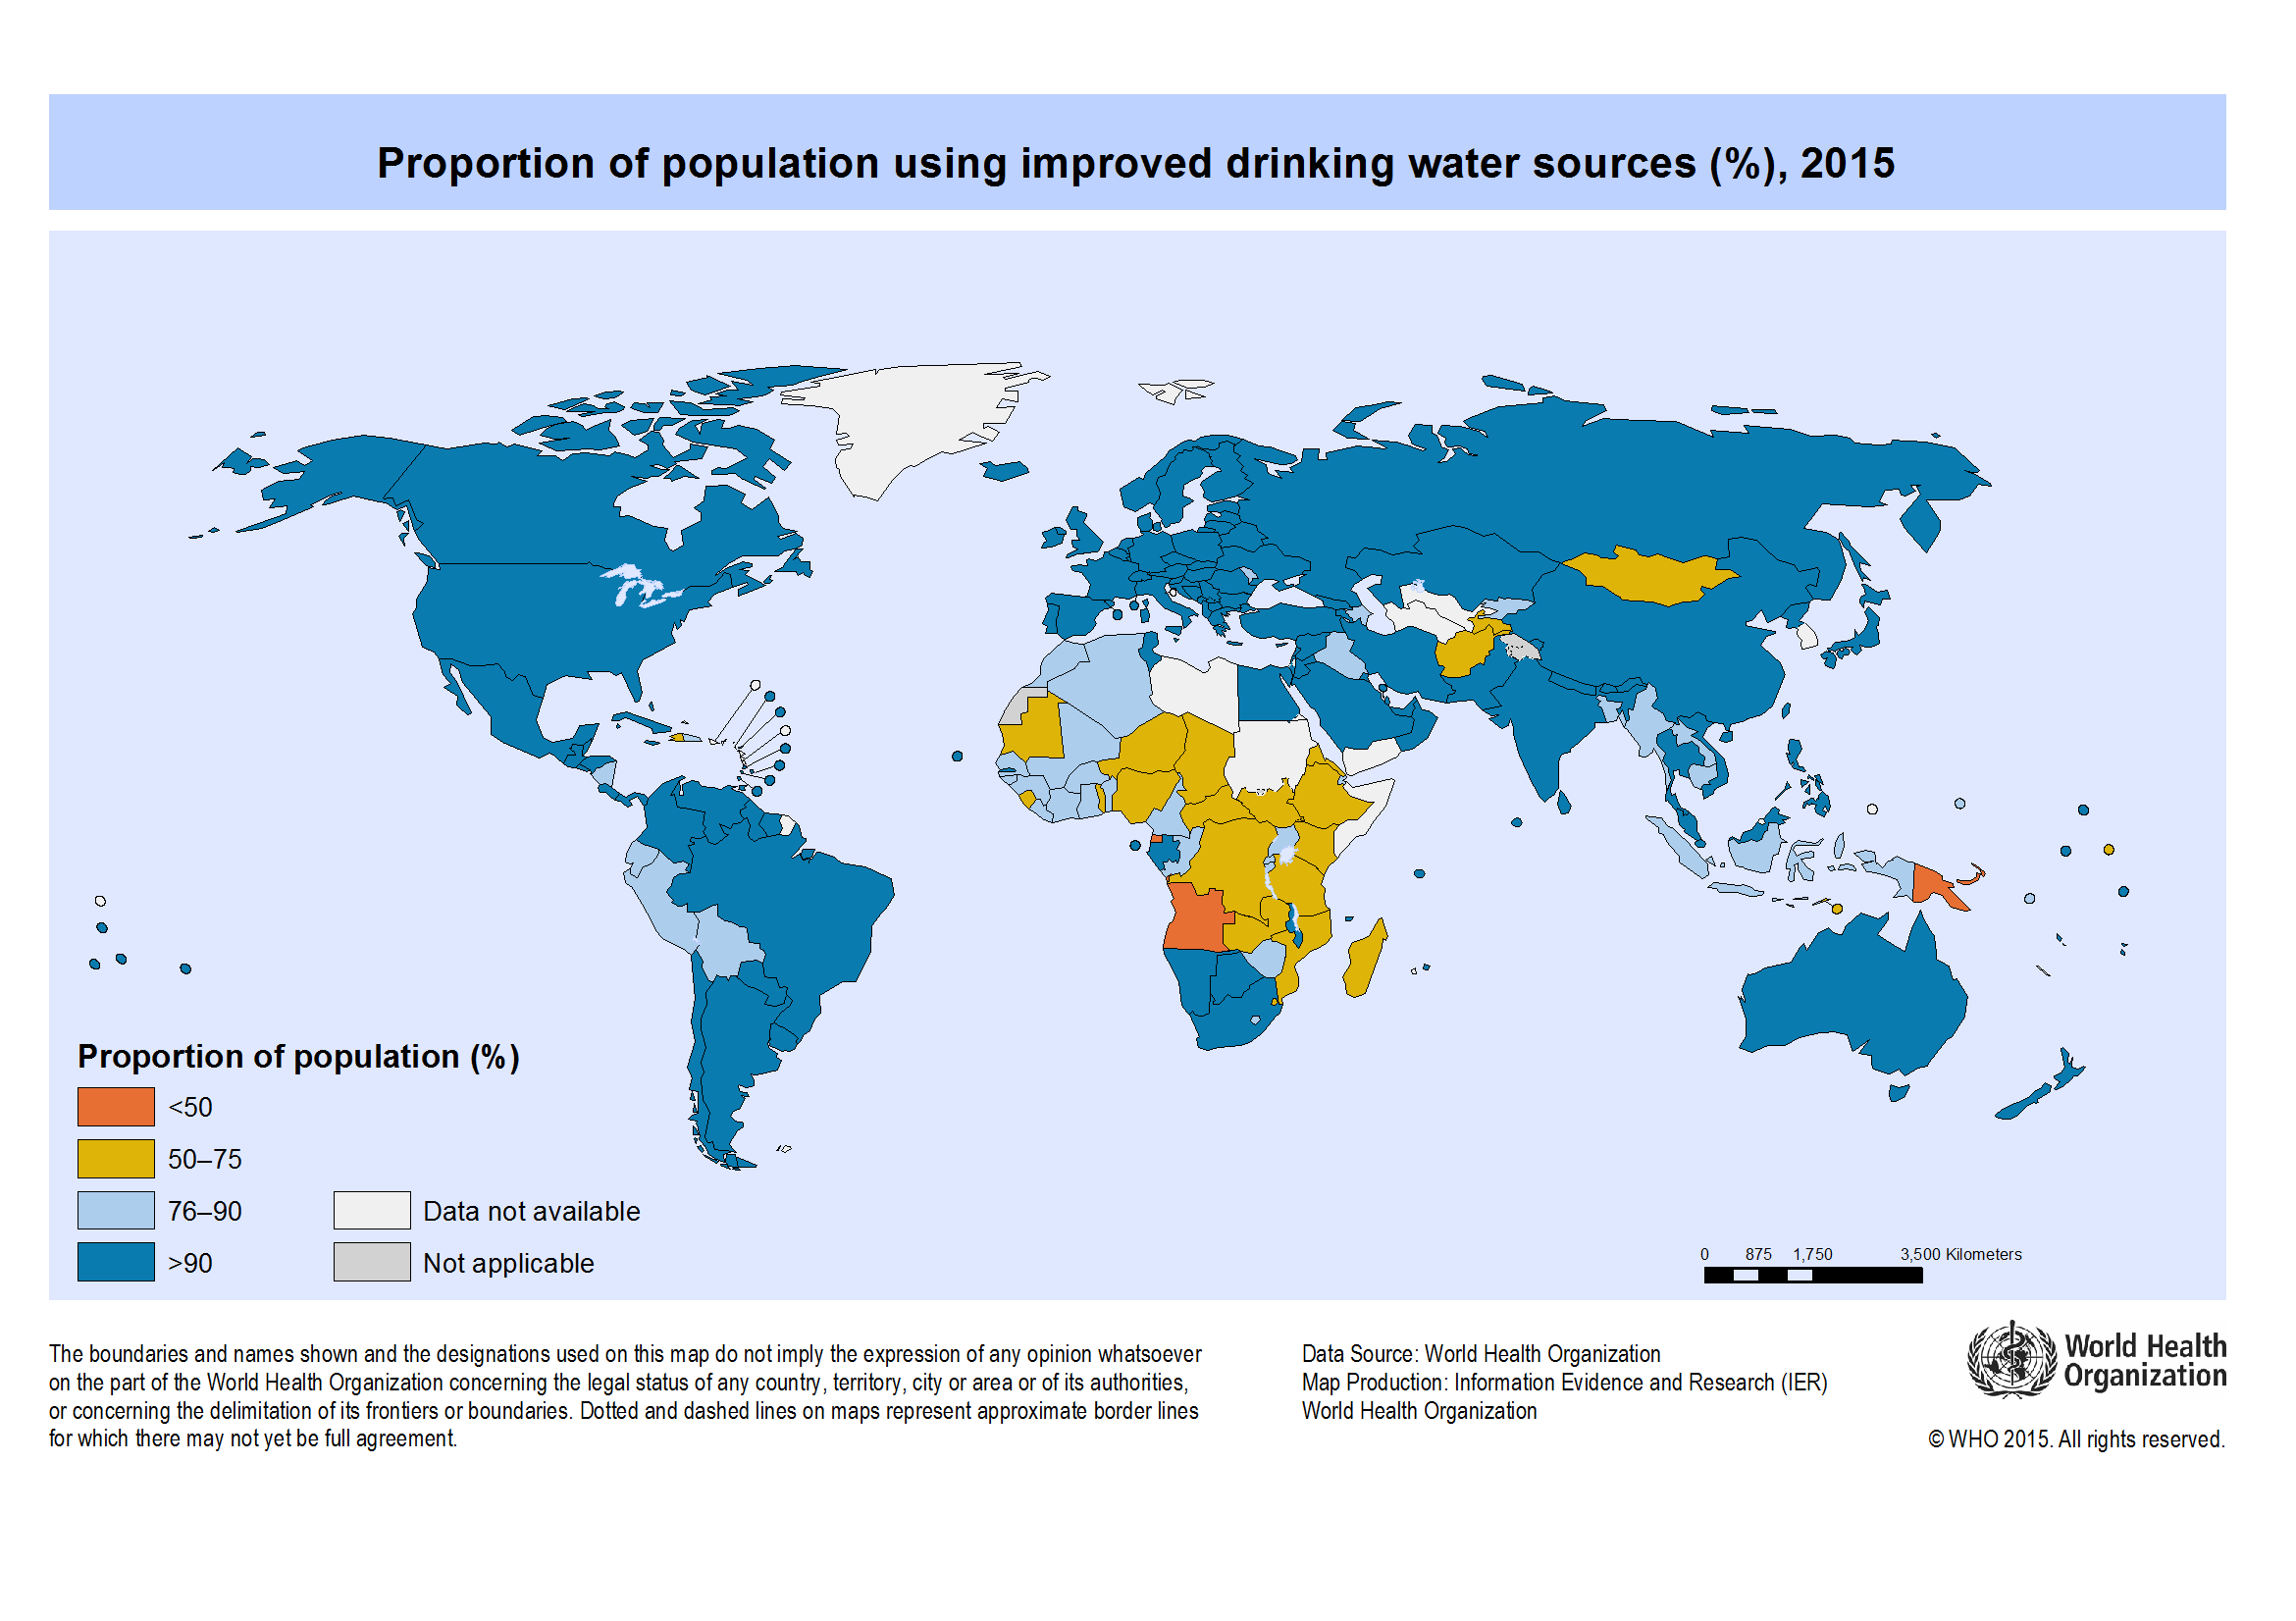 Proportion of population using improved drinking water sources (WHO, 2015).